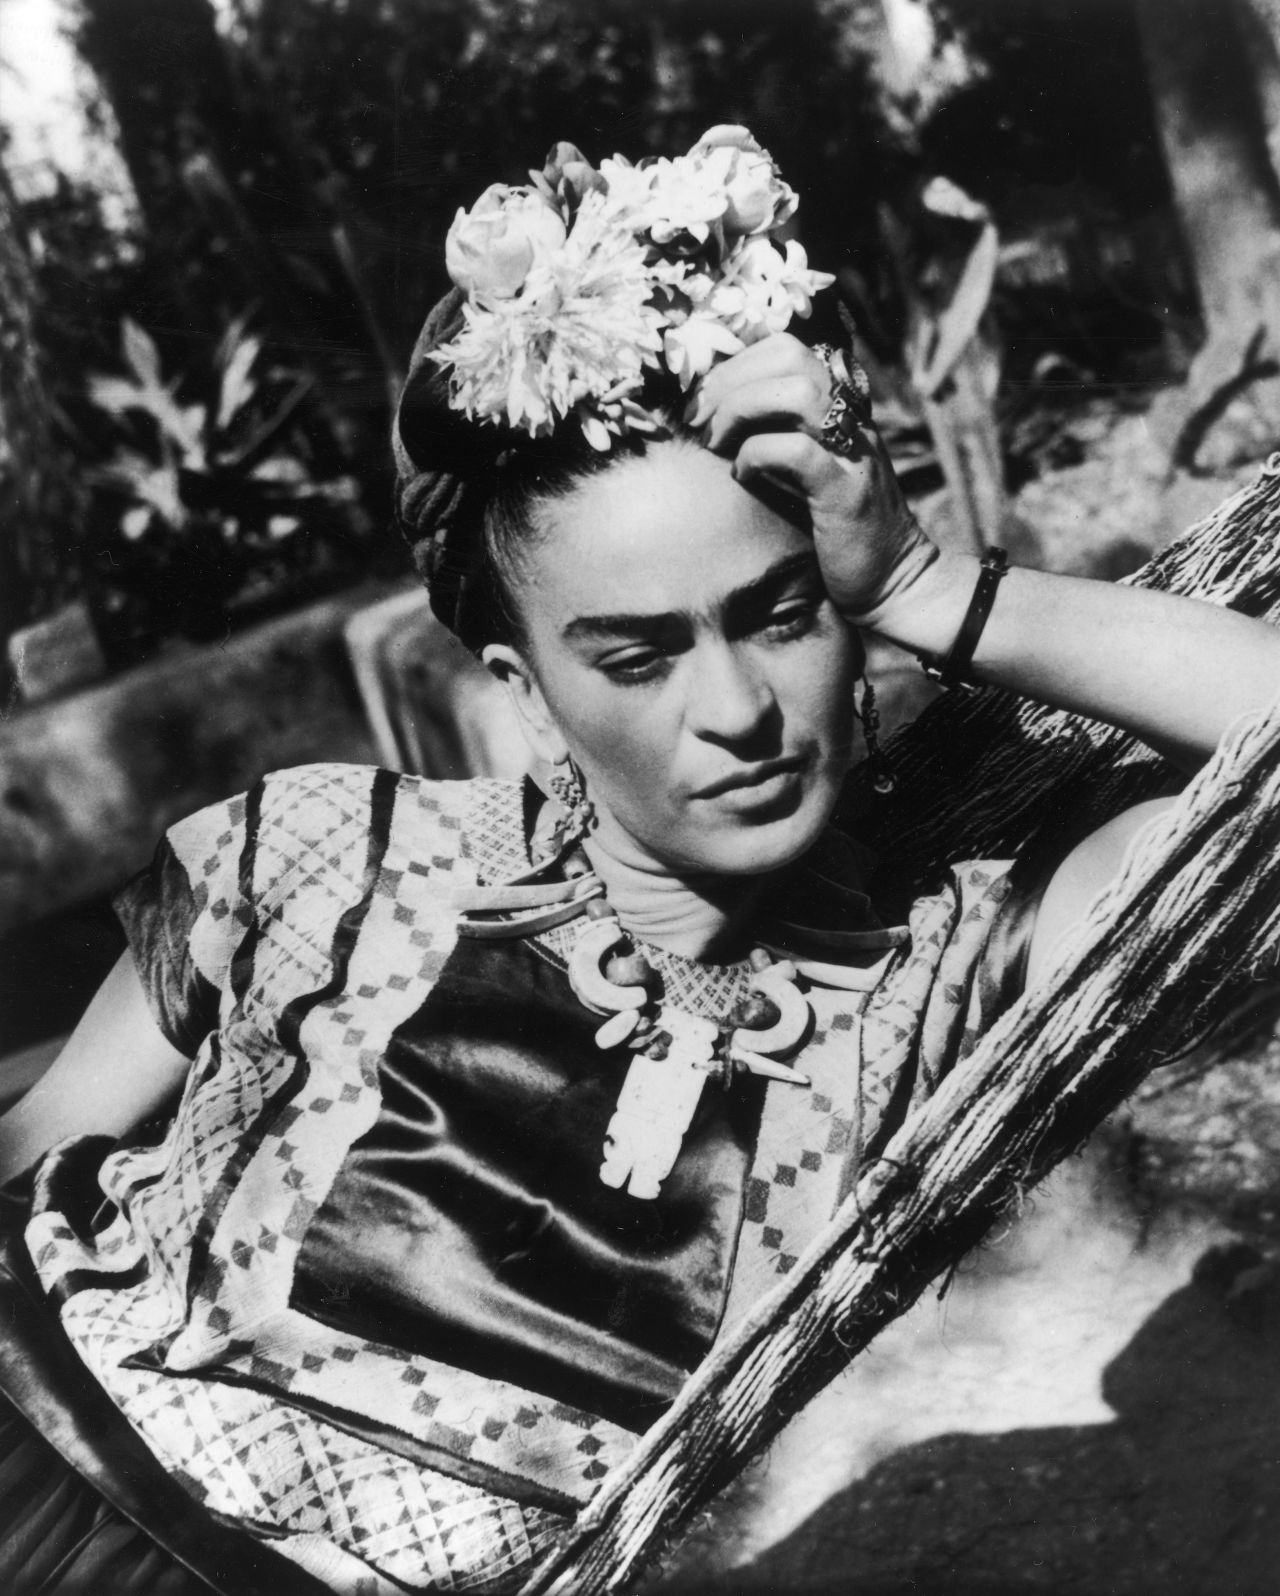 Mexican artist Frida Kahlo, who died 60 years ago this month, is perhaps most famous for her surreal self-portraits which today fetch up to $5m. But her distinctive floral headwear, folk costume and strong brows have also inspired a legion of women to dress up like their hero.